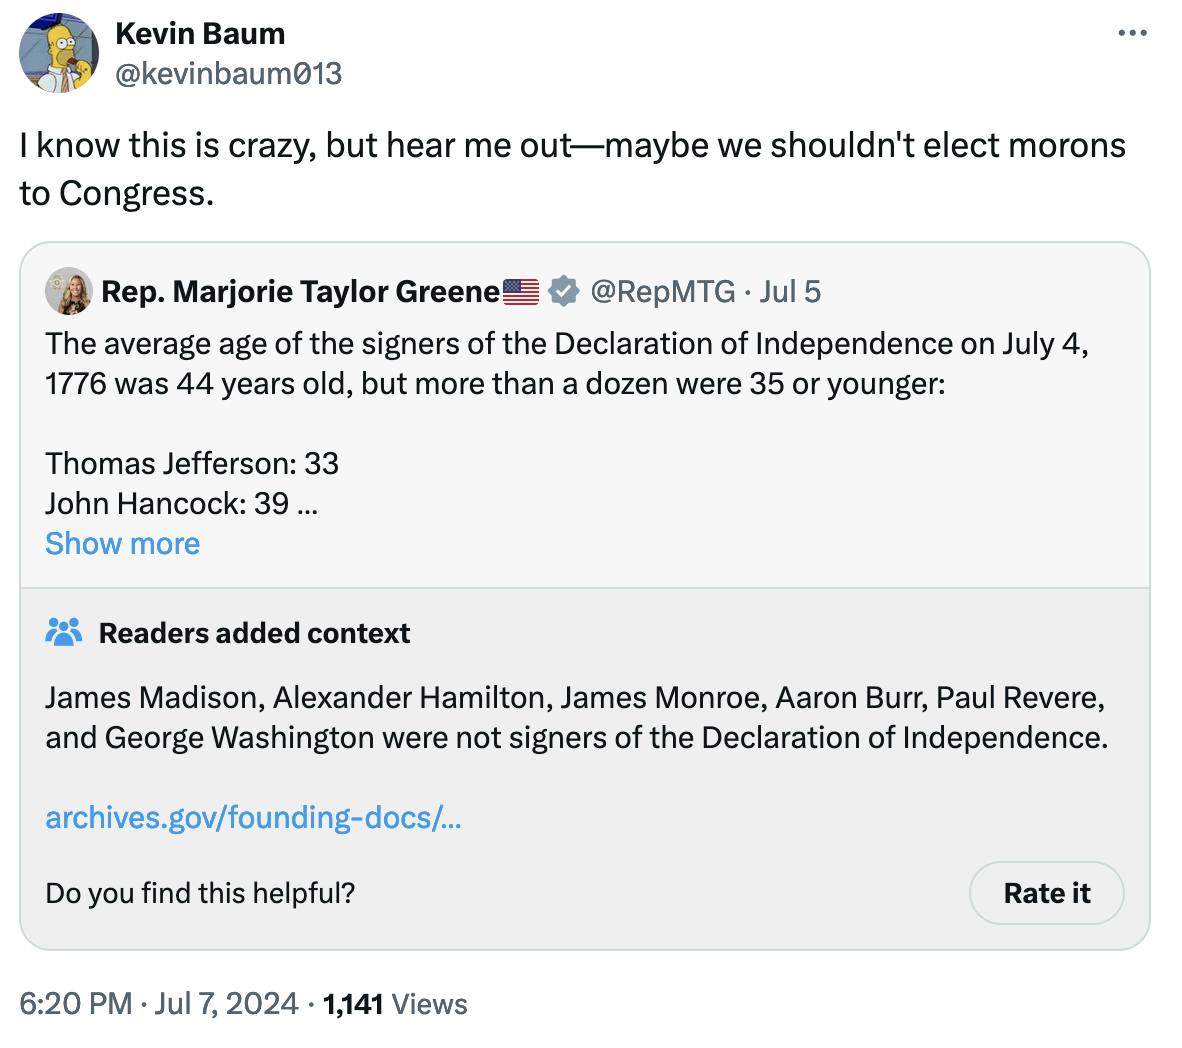 Tweet screenshot Kevin Baum @kevinbaum013: I know this is crazy, but hear me out—maybe we shouldn't elect morons to Congress.